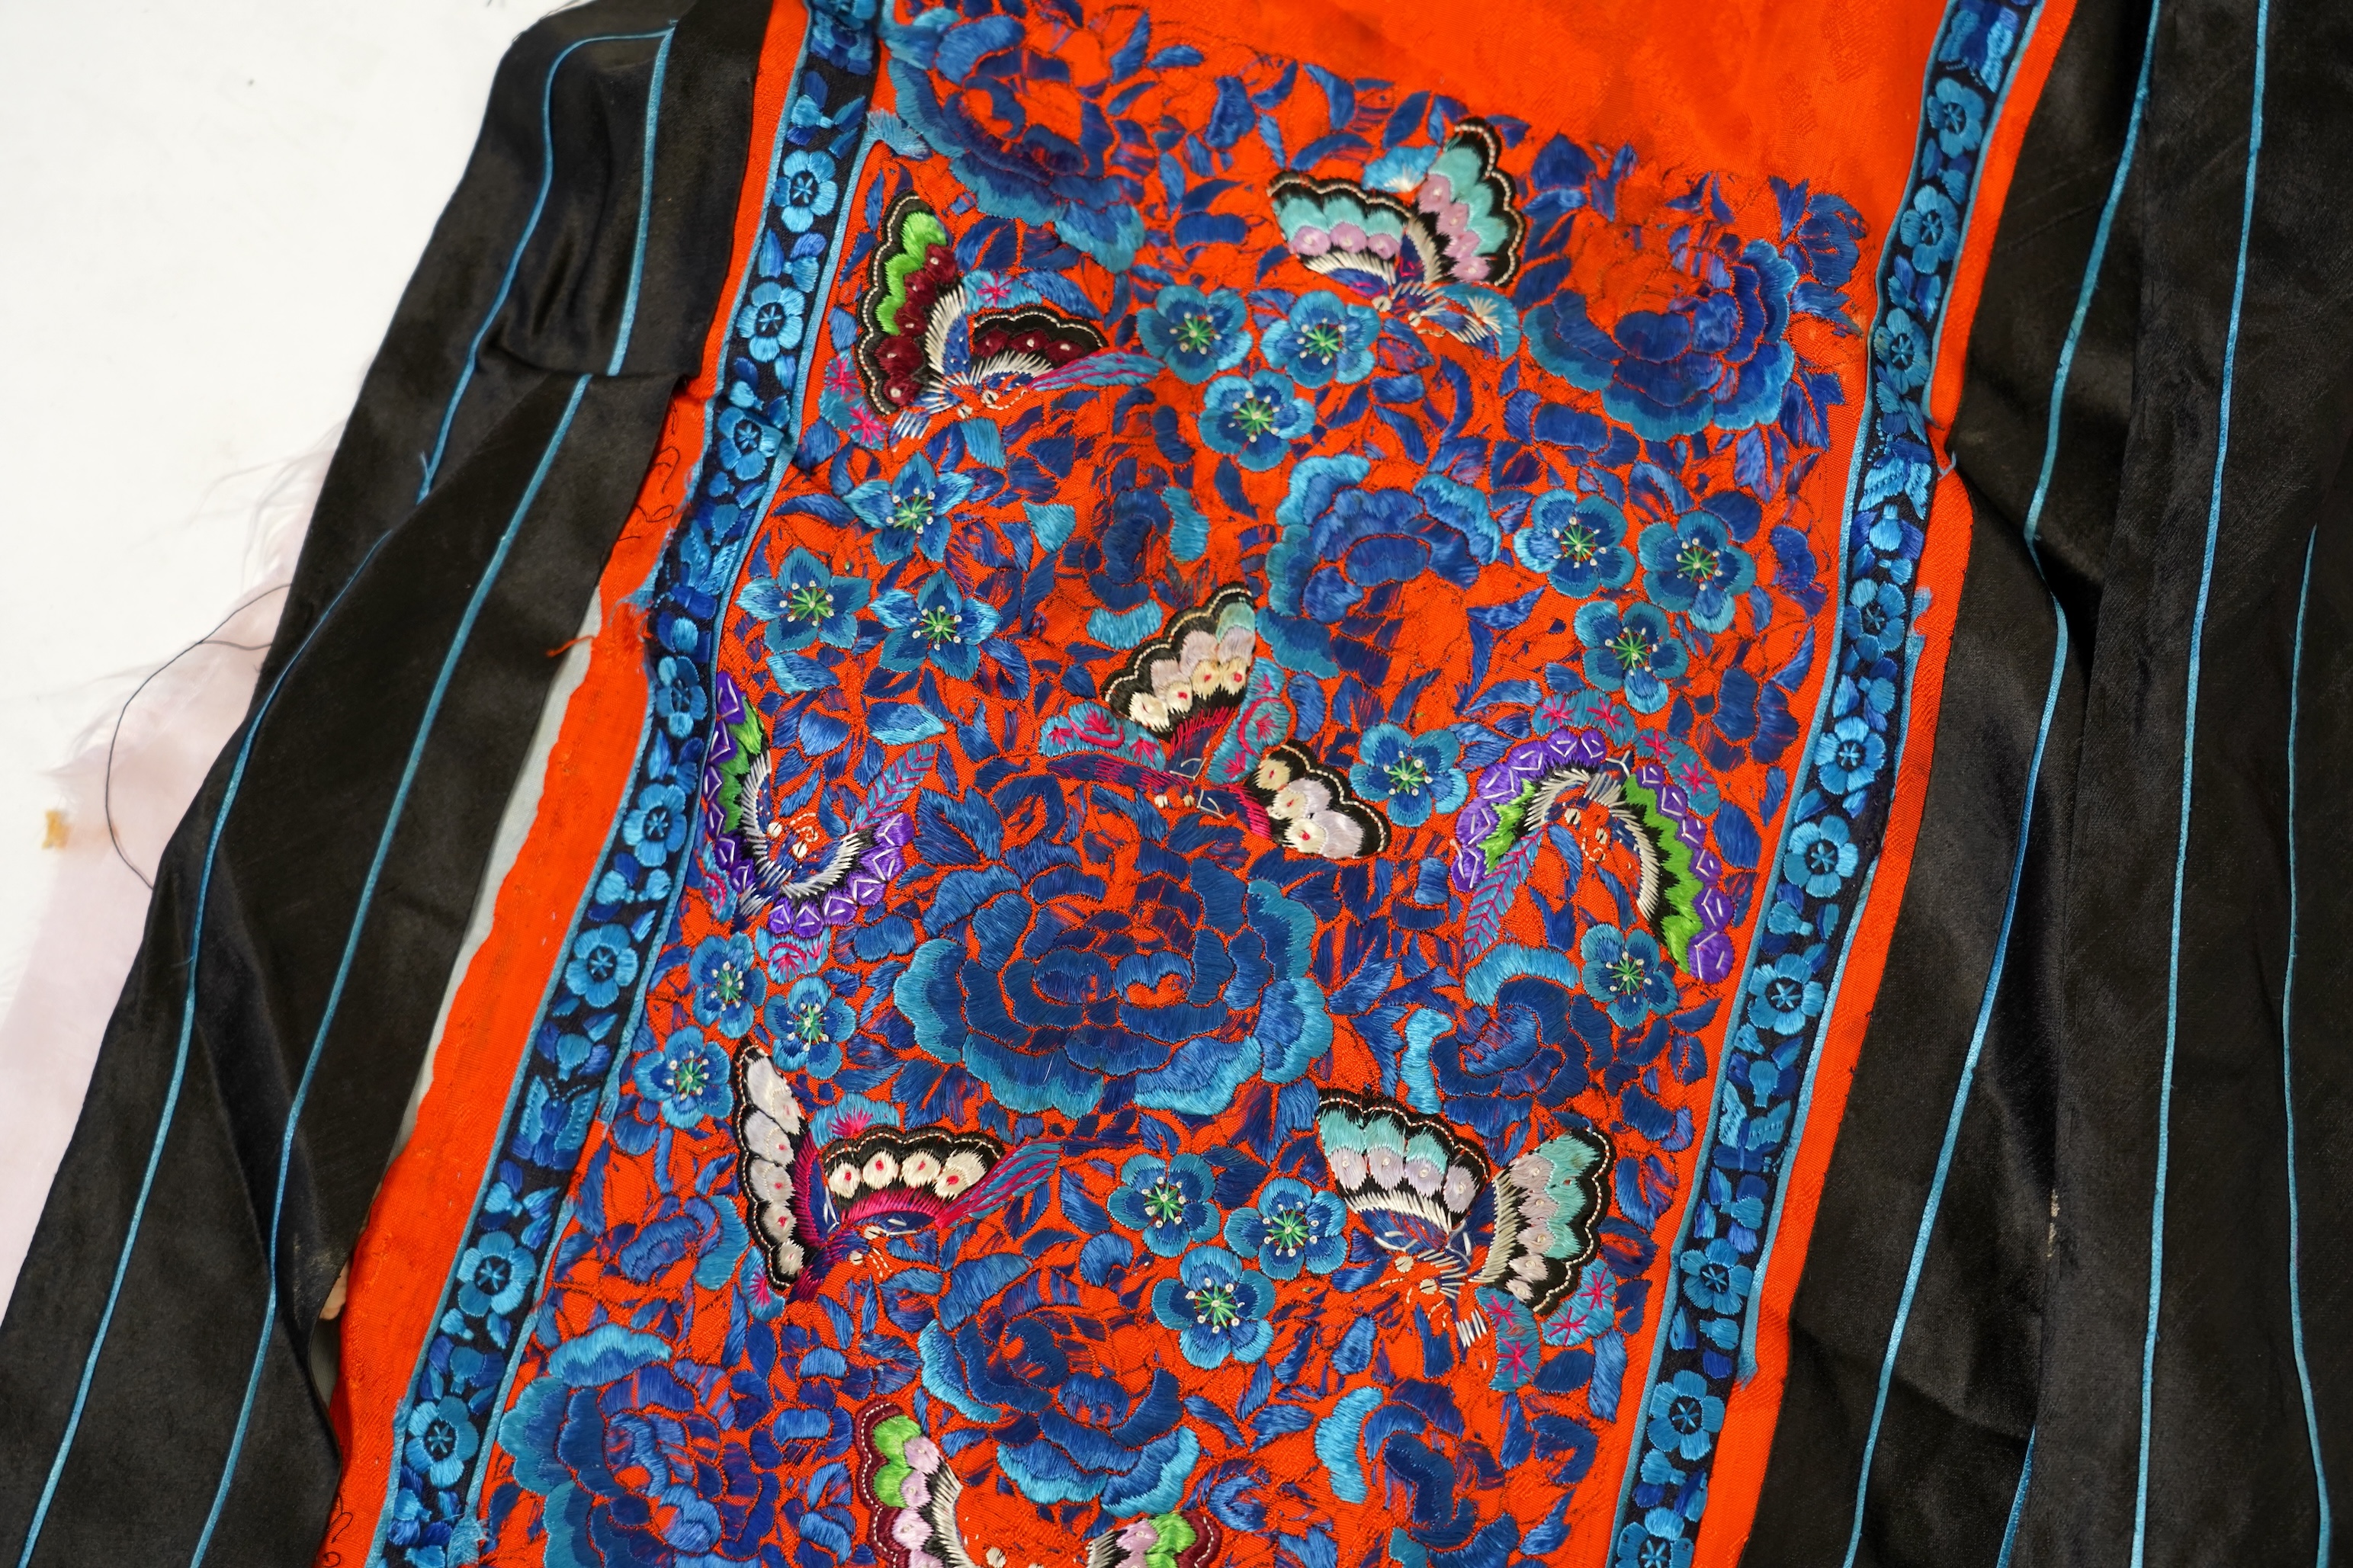 A late 19th century Chinese embroidered skirt, now made into a tunic